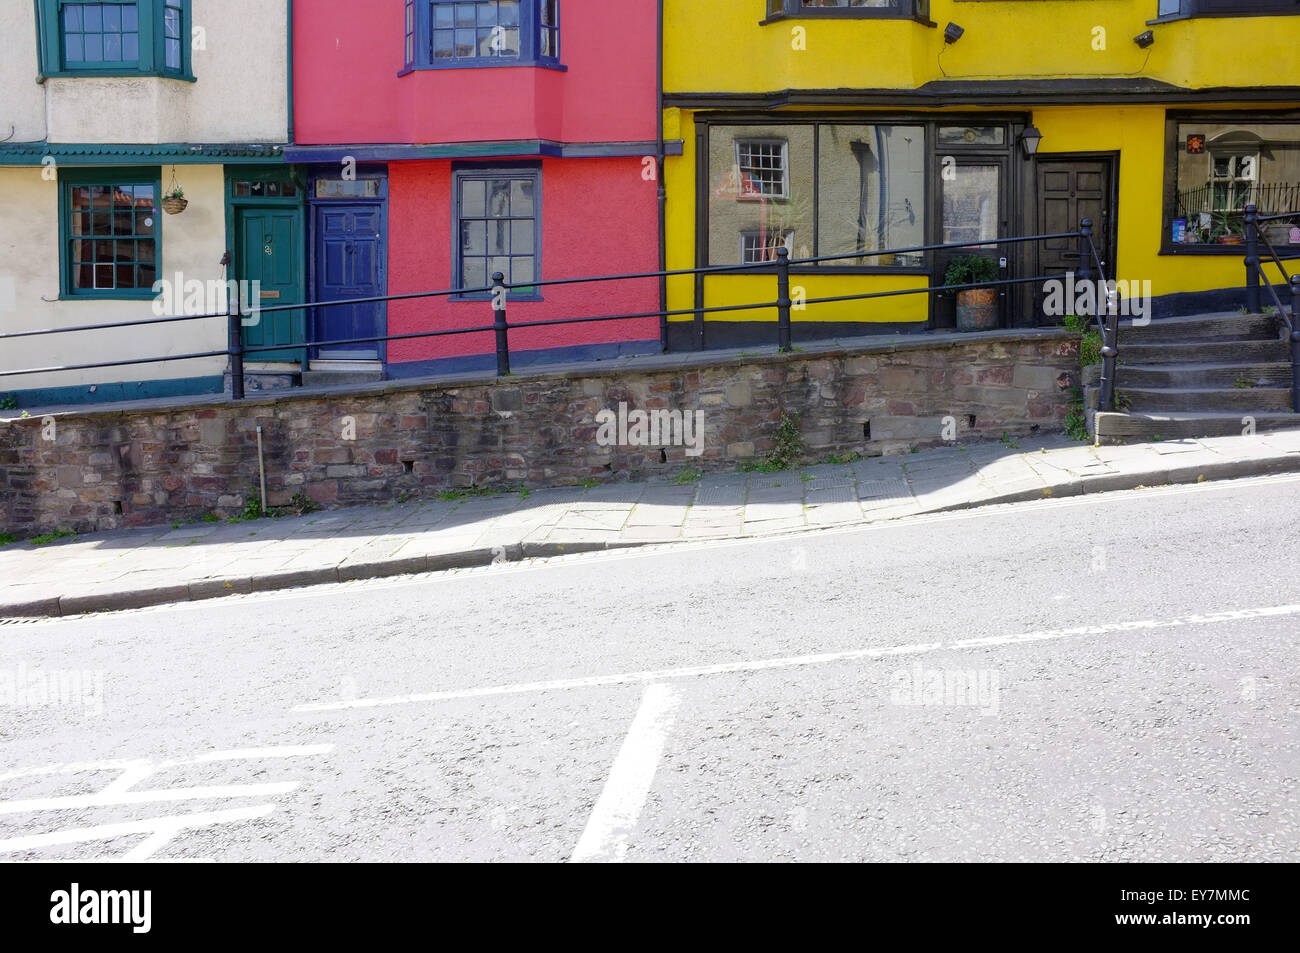 A row of colourful houses on a sloping road in Bristol. Stock Photo